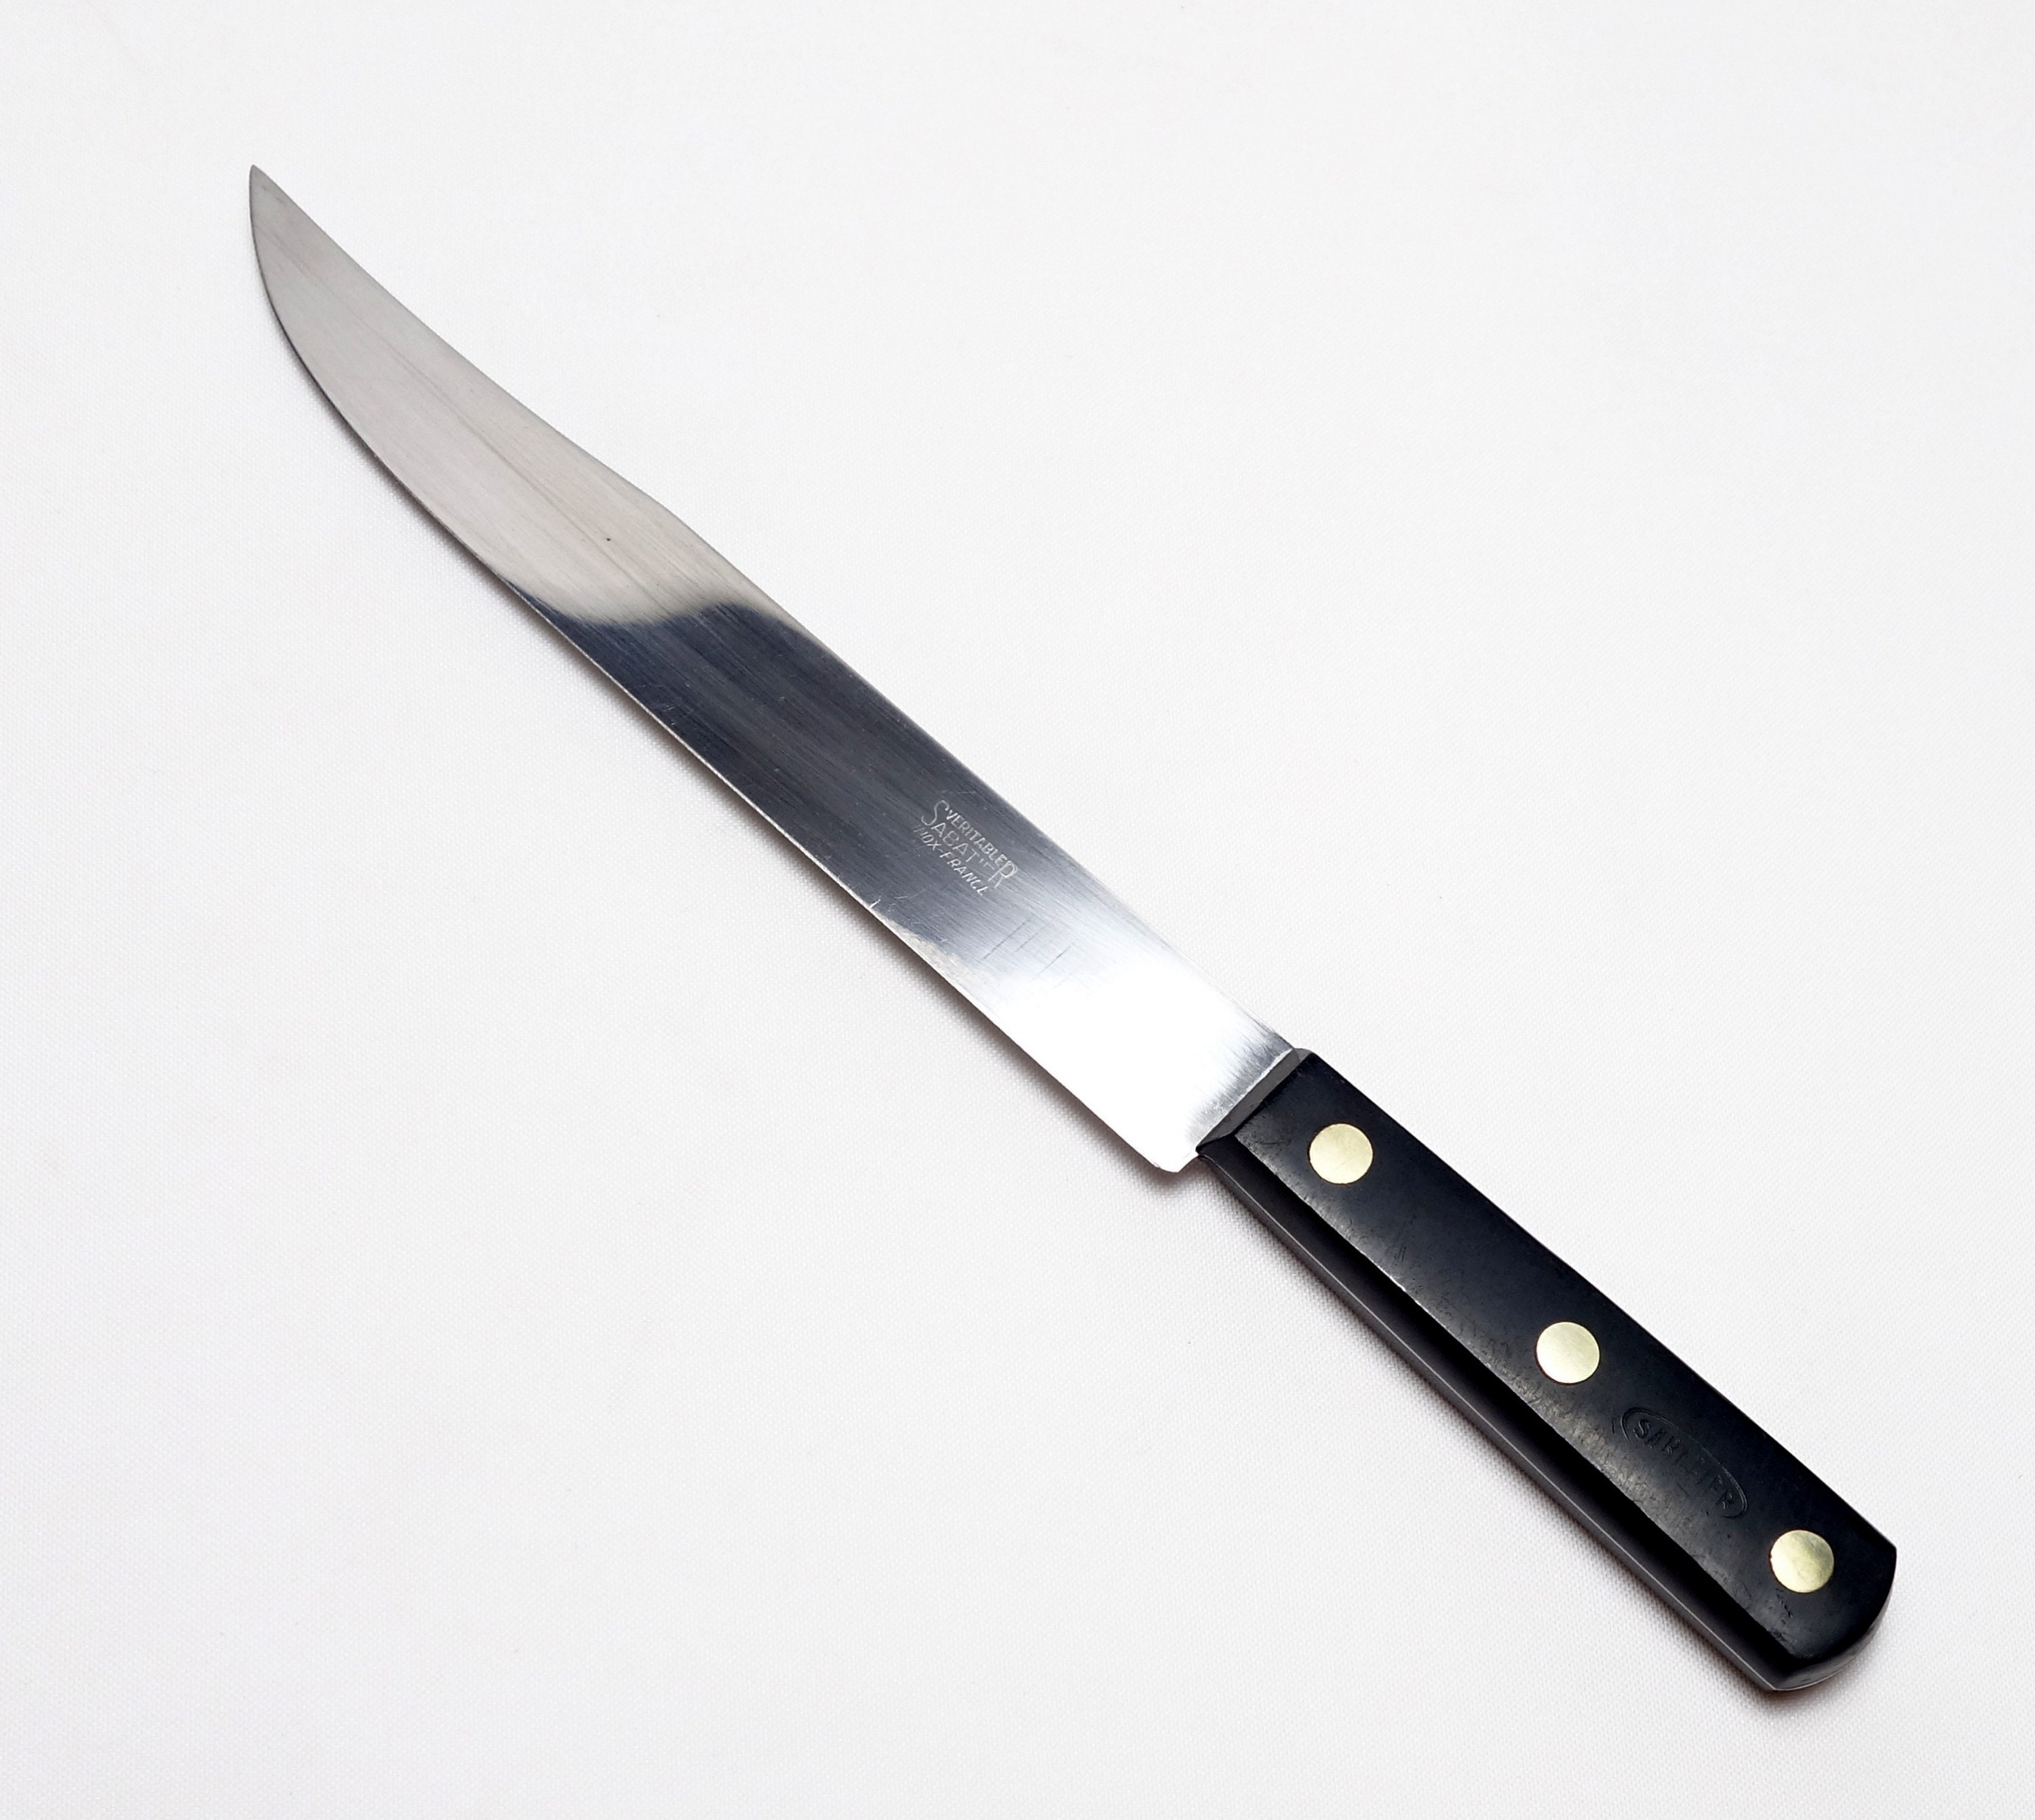 SABATIER FRERES IDEAL Chef Knife 8, Made in Thiers France Since 1885